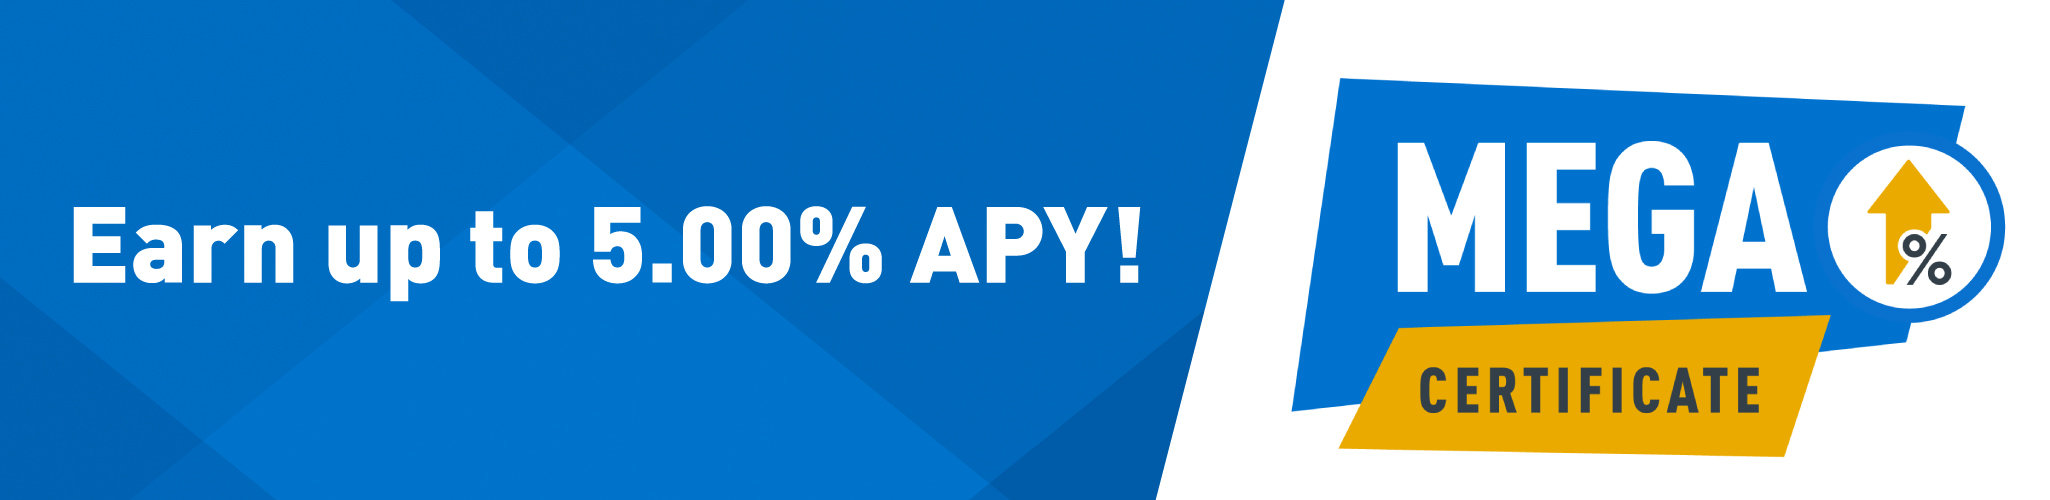 mega certificate earn up to 5.00 percent apy with our 14 month certificate